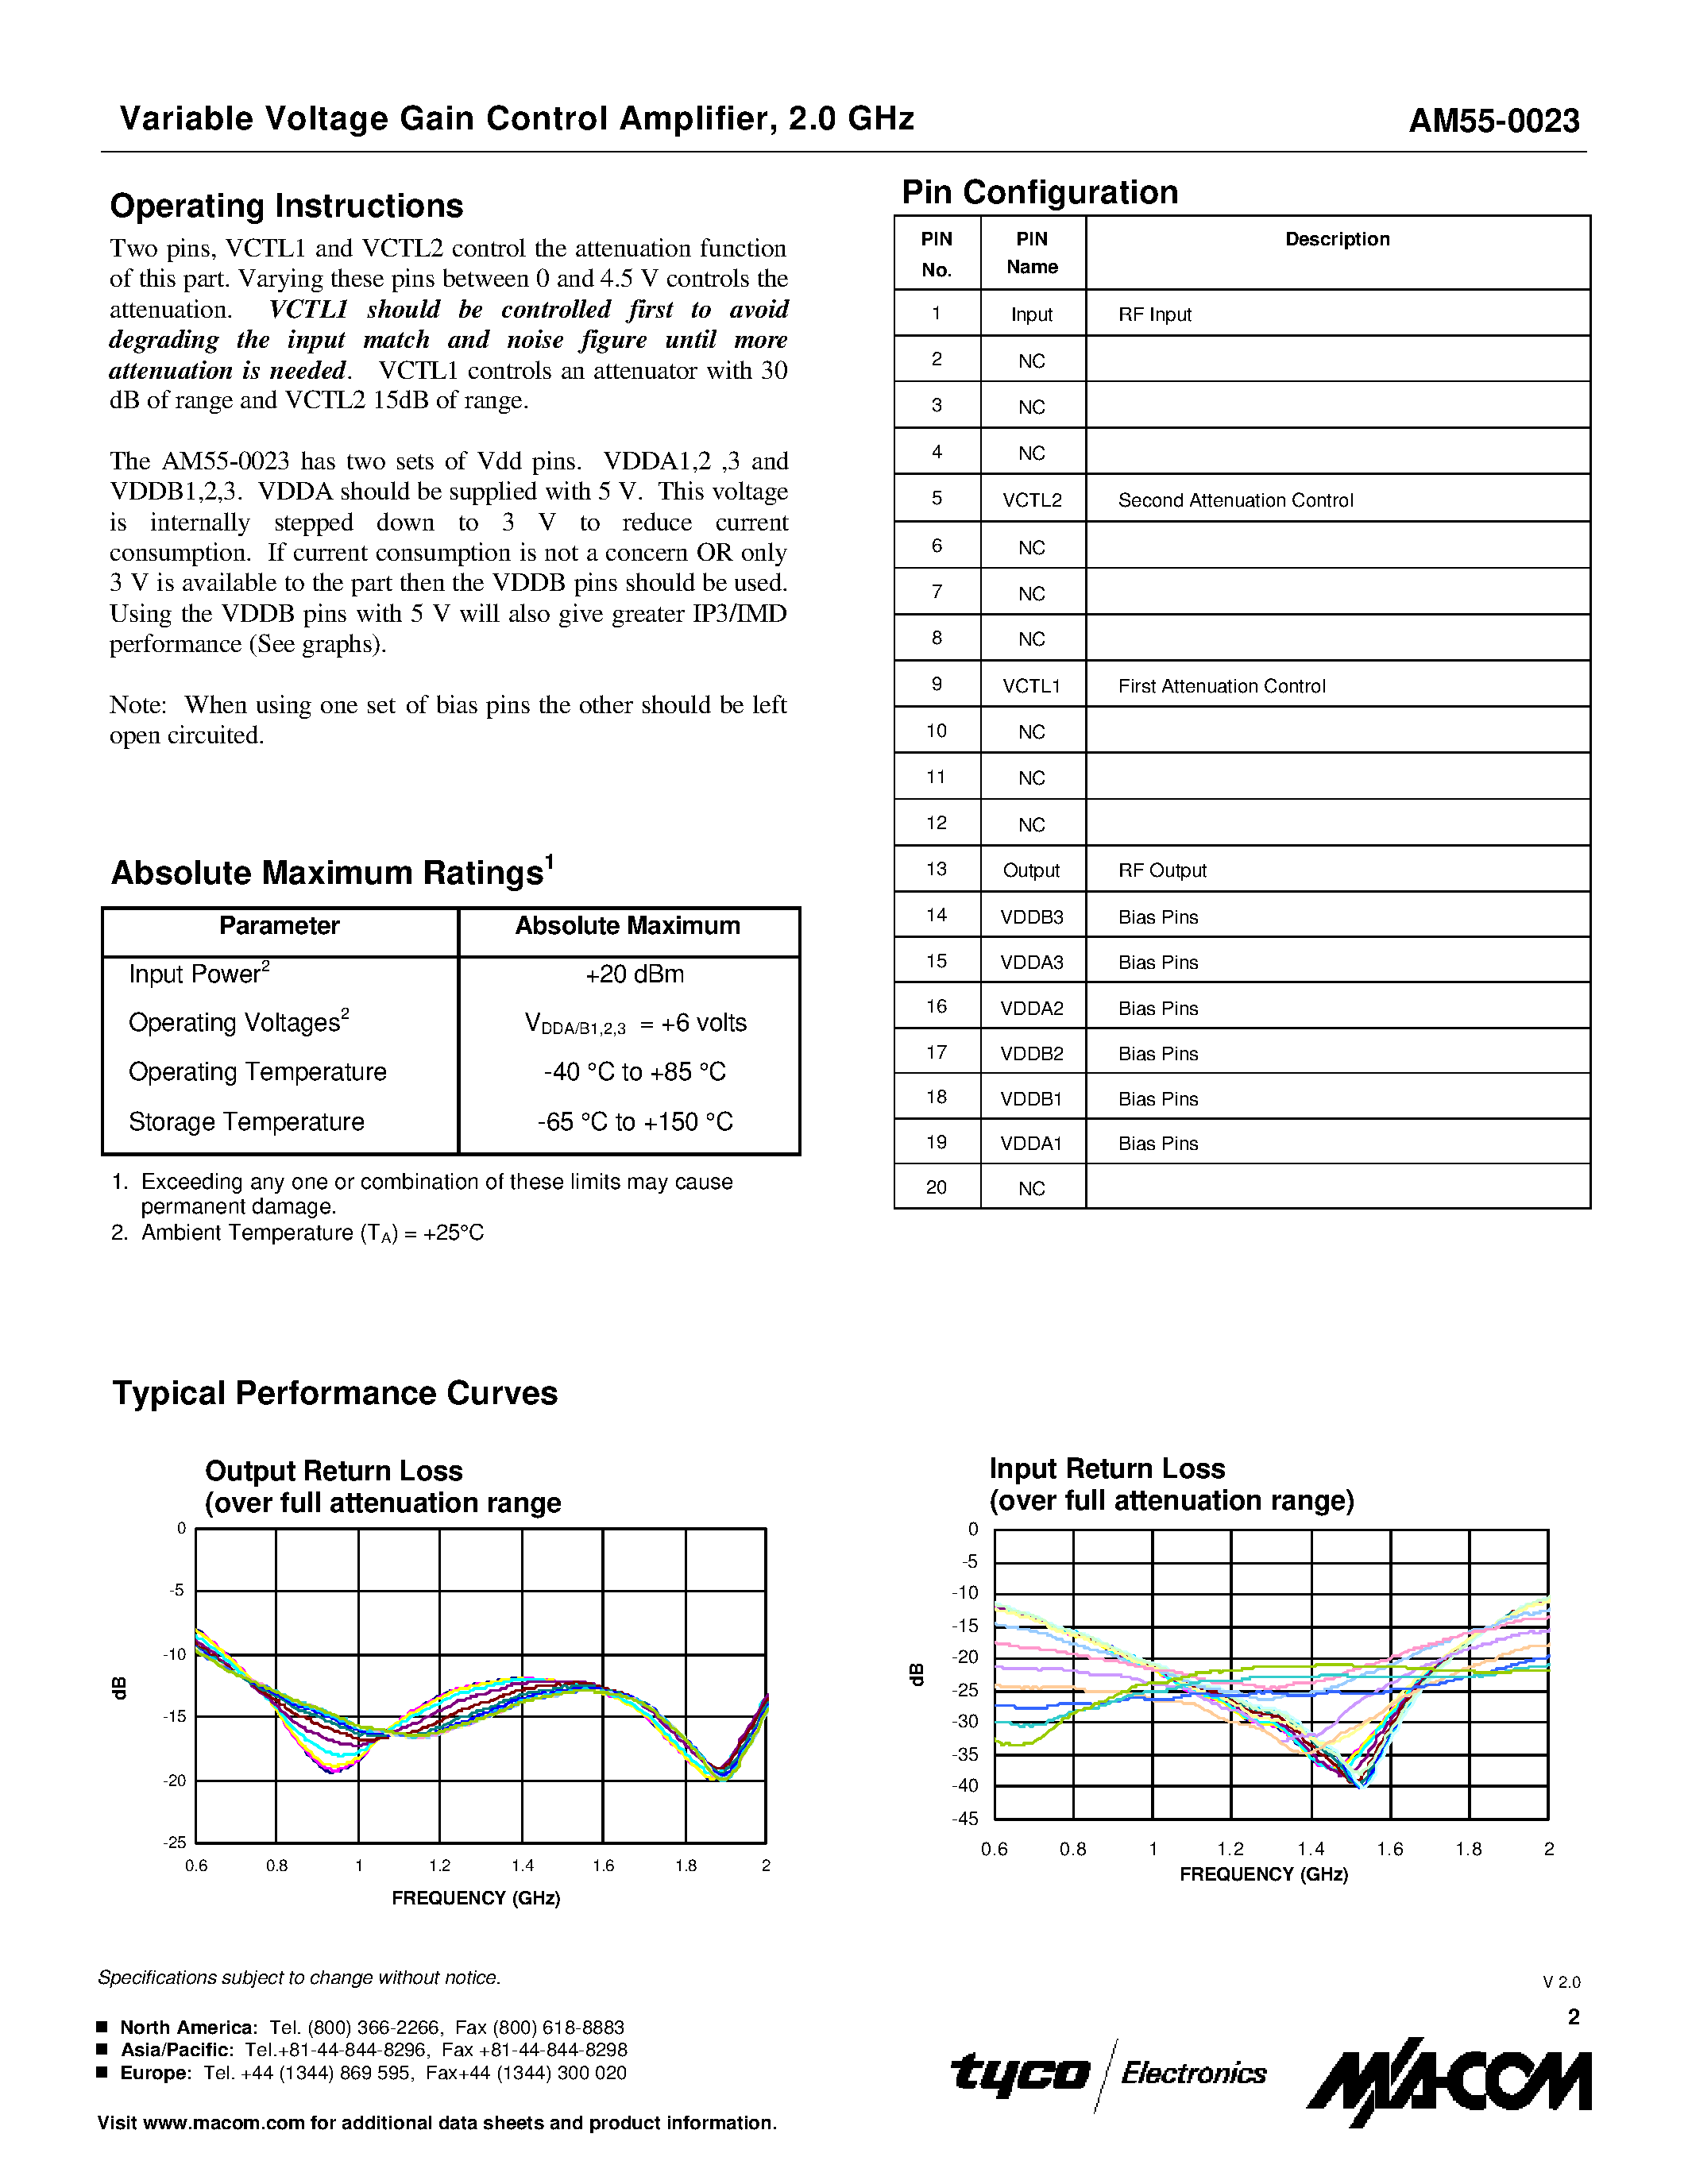 Datasheet AM55-0023RTR - Variable Voltage Gain Control Amplifier 0.8 - 2.0 GHz page 2